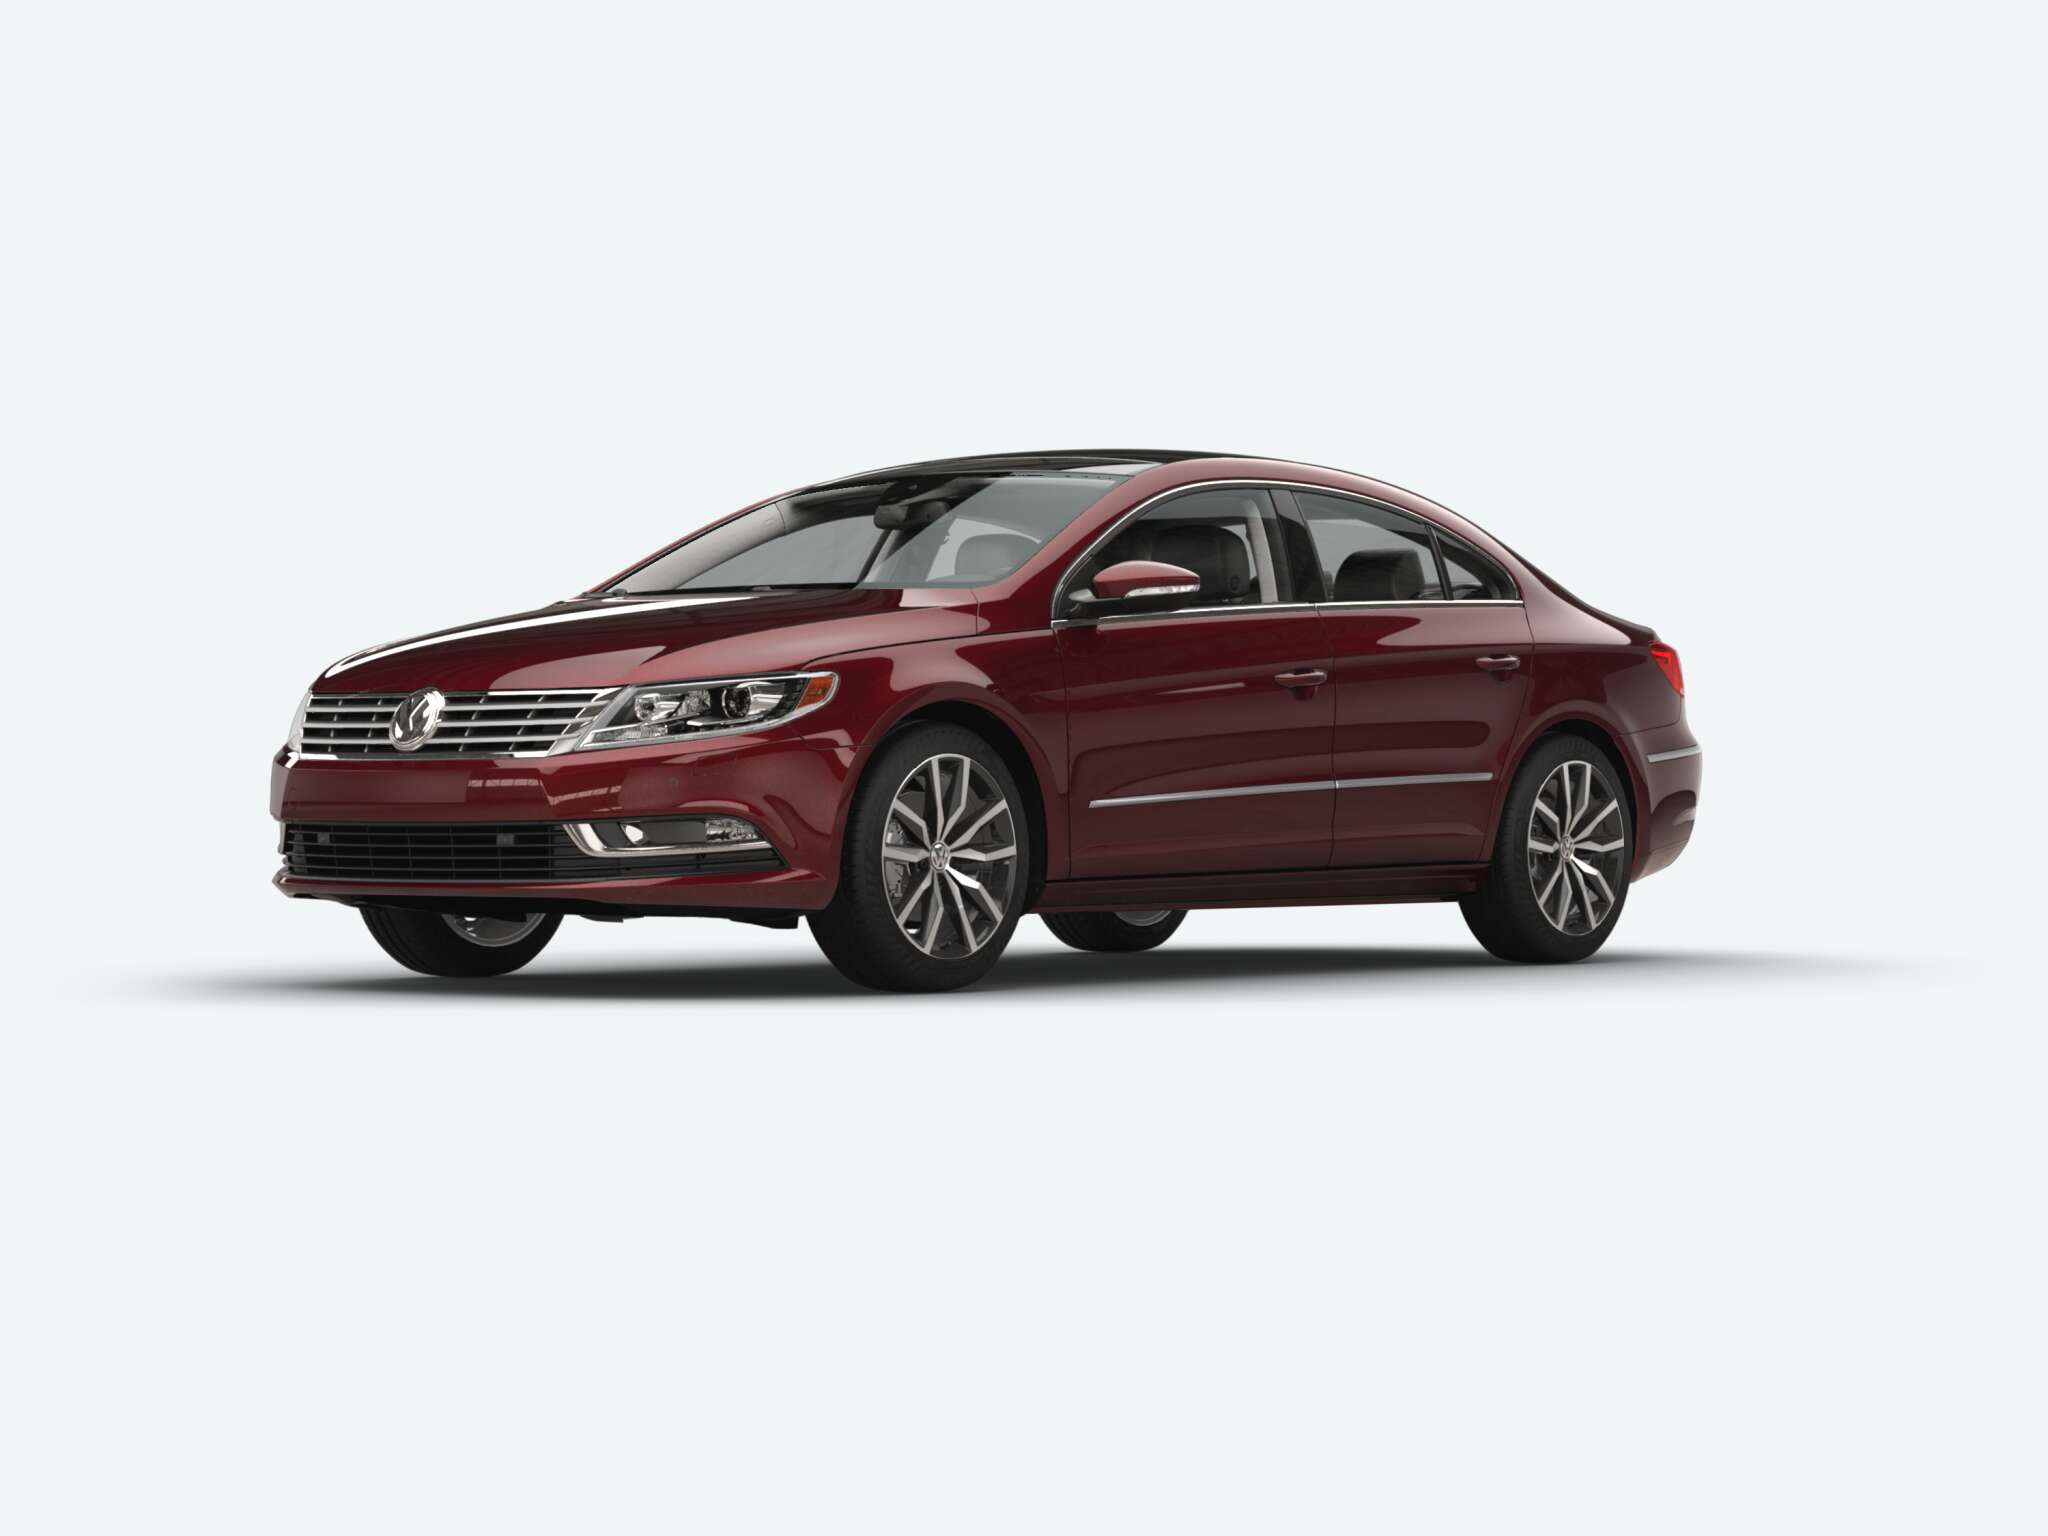 Volkswagen CC V6 Executive 4MOTION front cross view